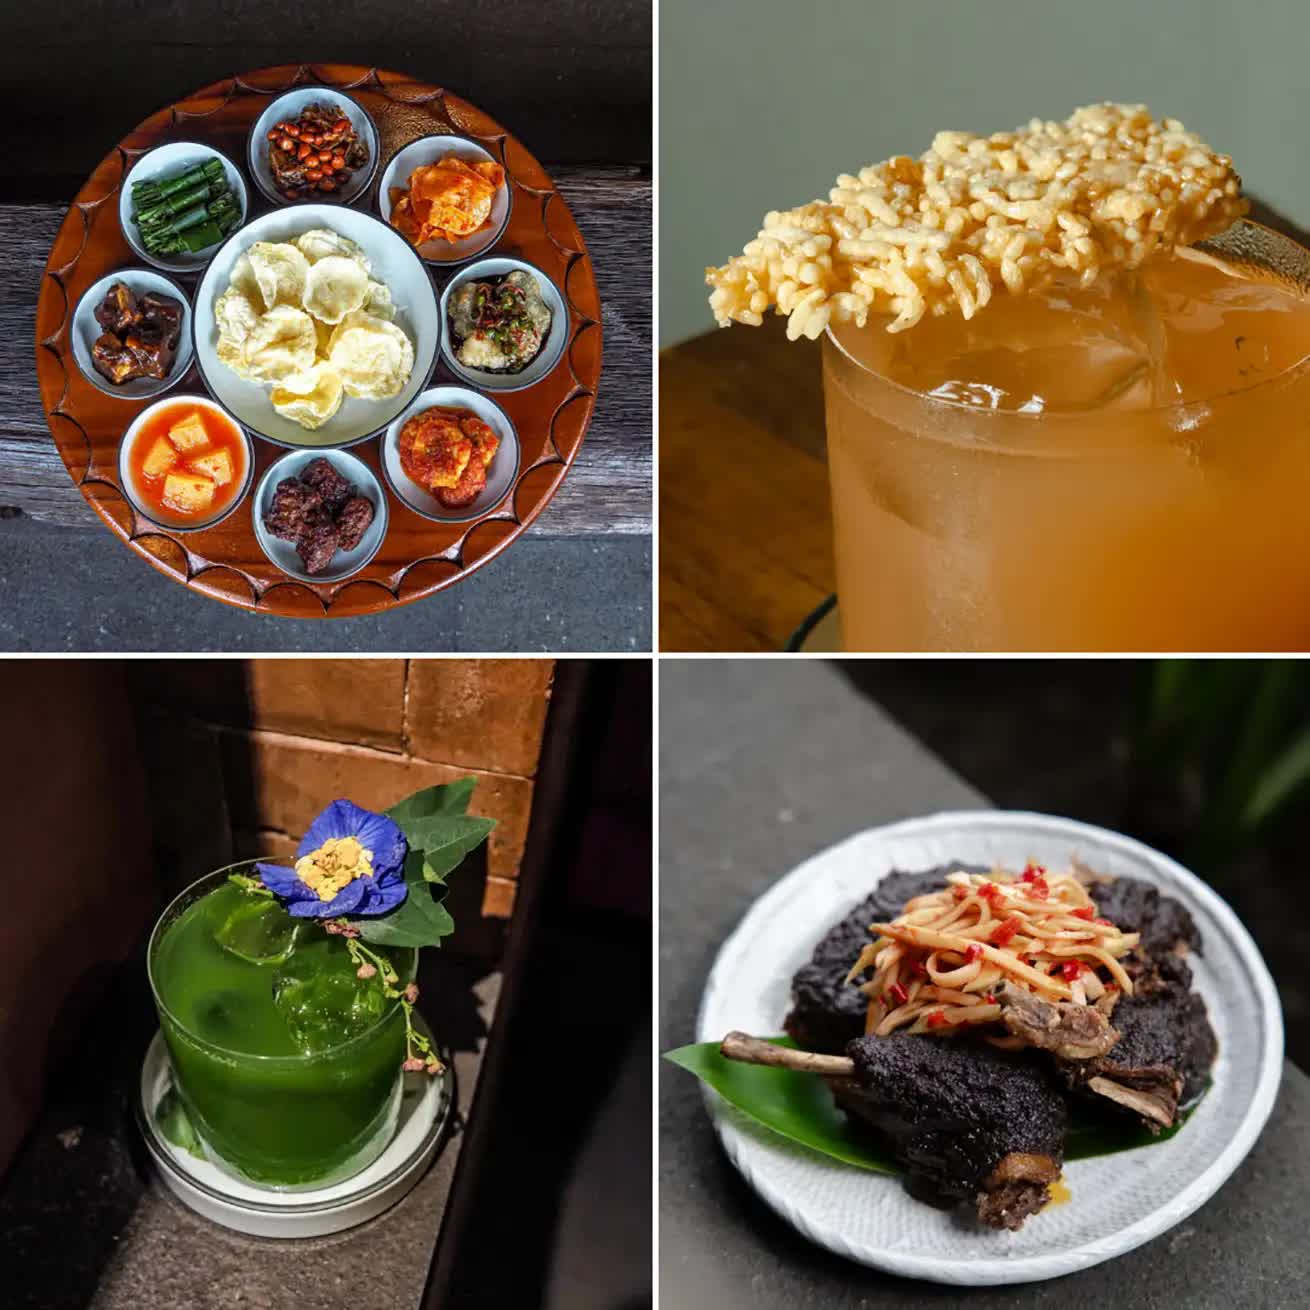 Snacks, meat dishes and drinks from Nusantara restaurant